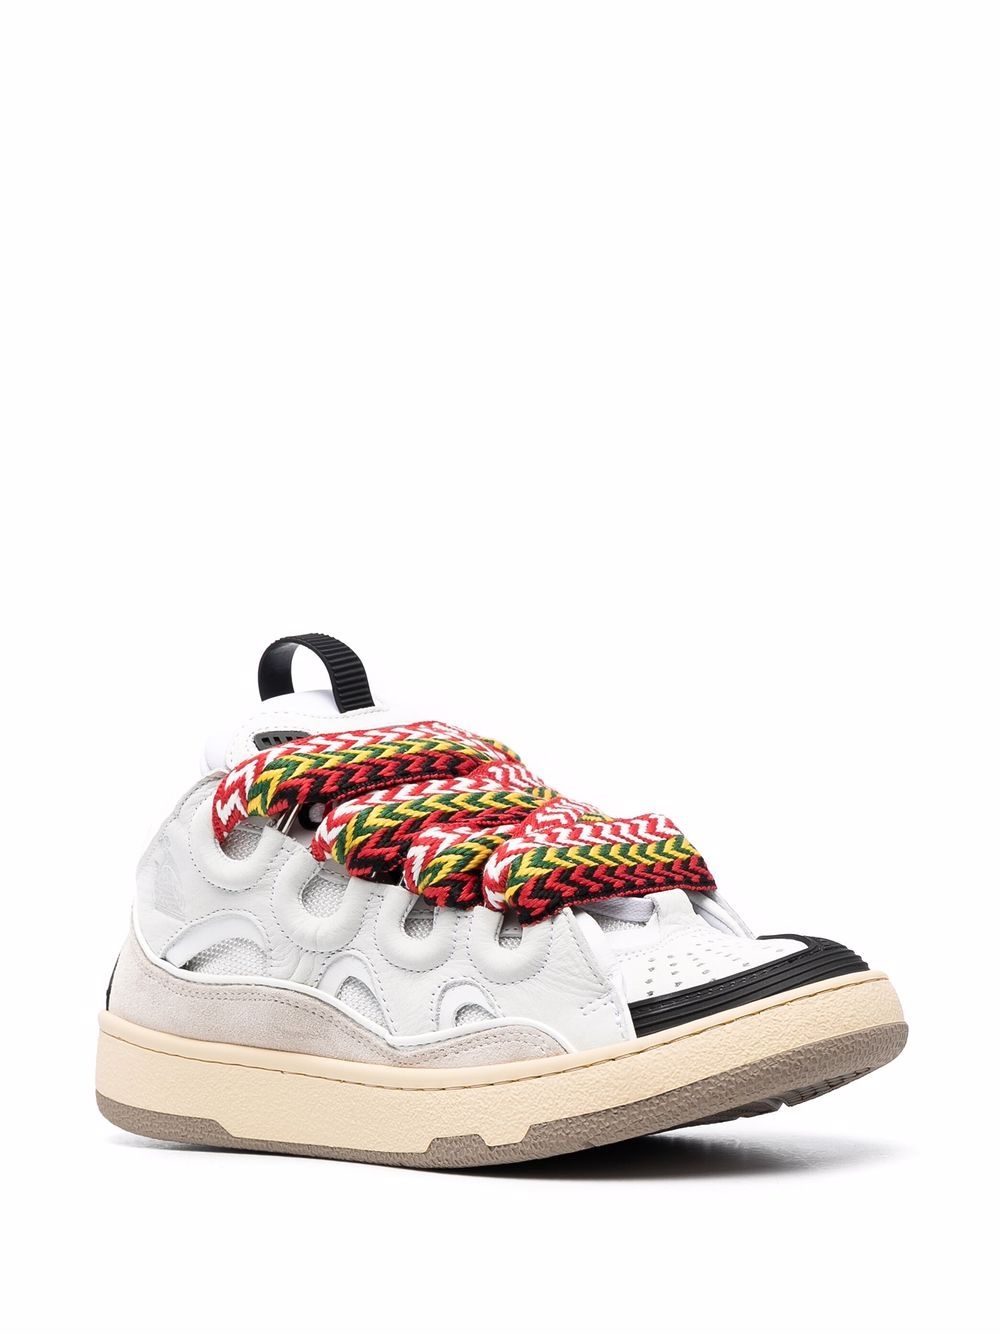 Lanvin Curb lace-up Sneakers - Farfetch